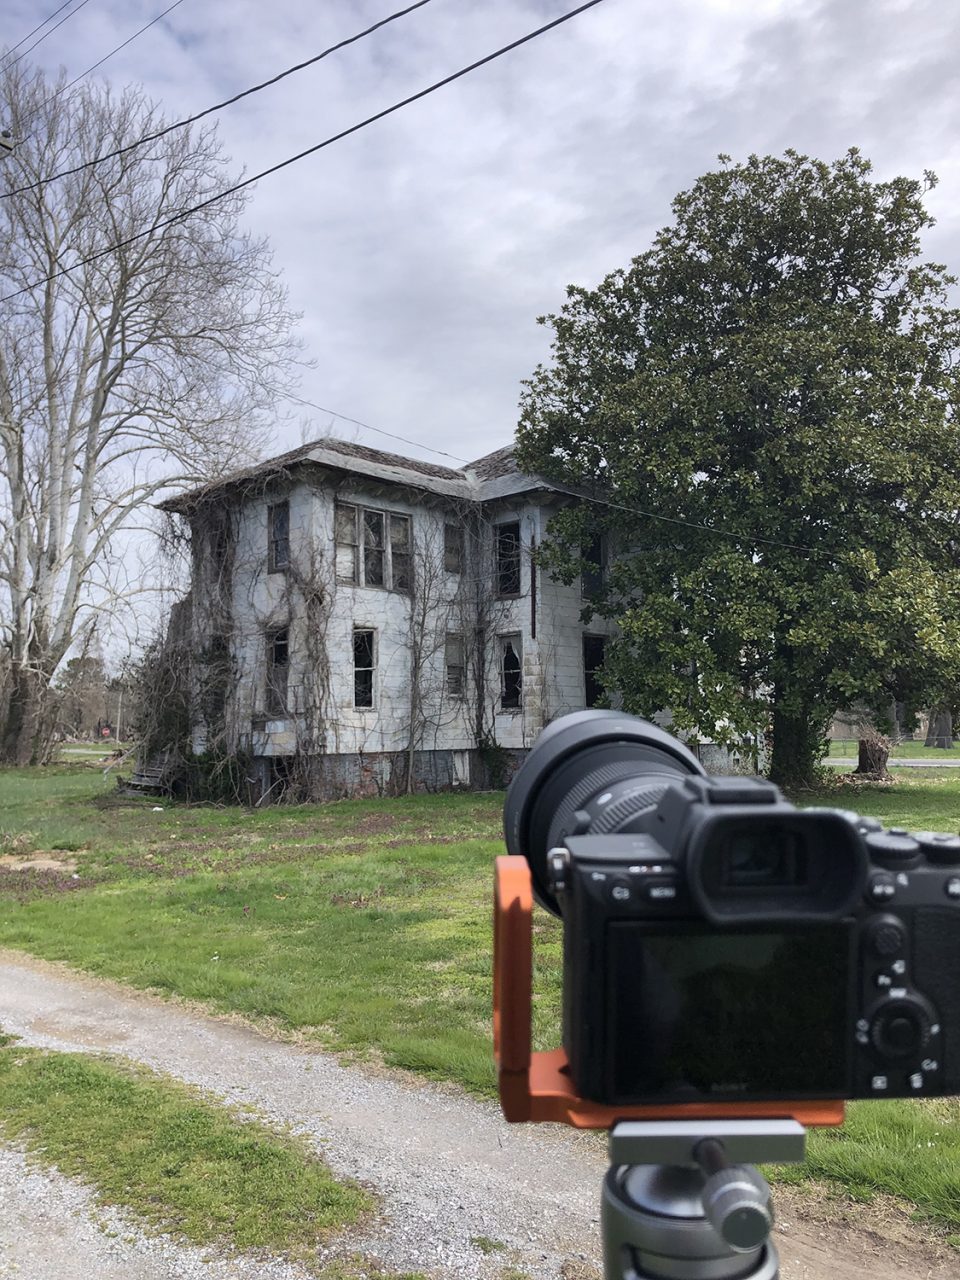 On-location photo shows my camera in position to capture this incredible big abandoned house in Mounds, Illinois.